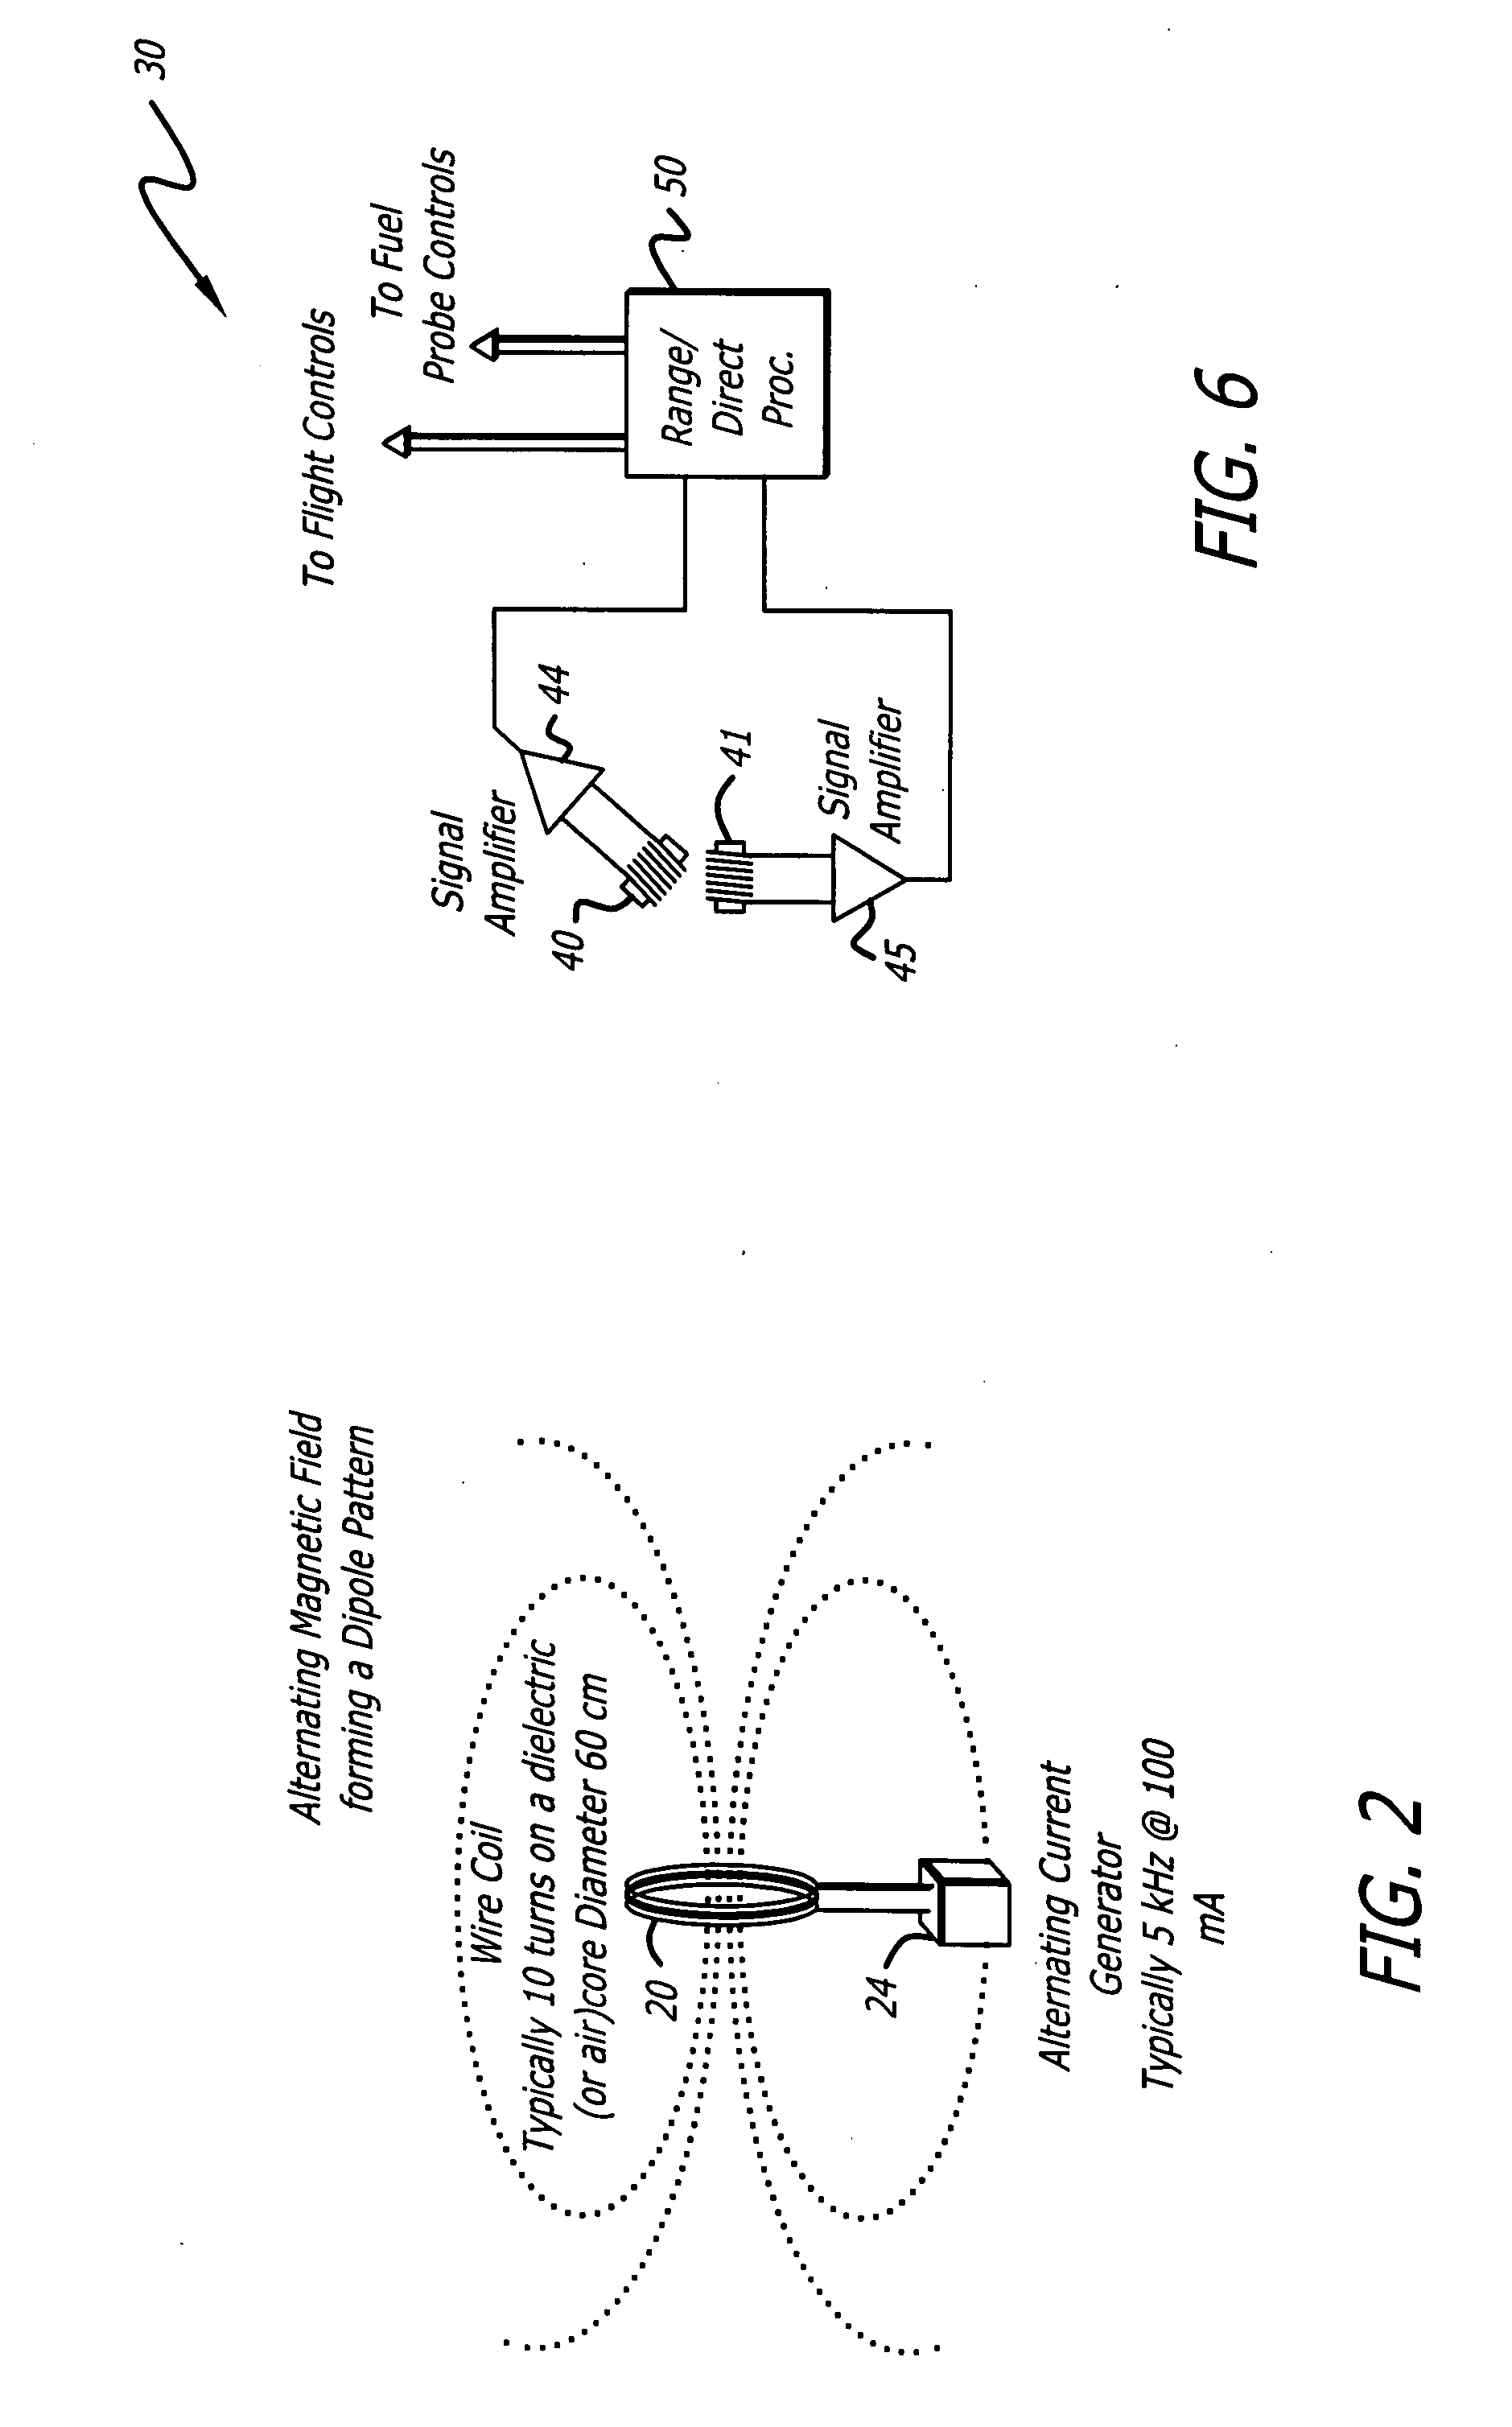 Method and system for inflight refueling of unmanned aerial vehicles